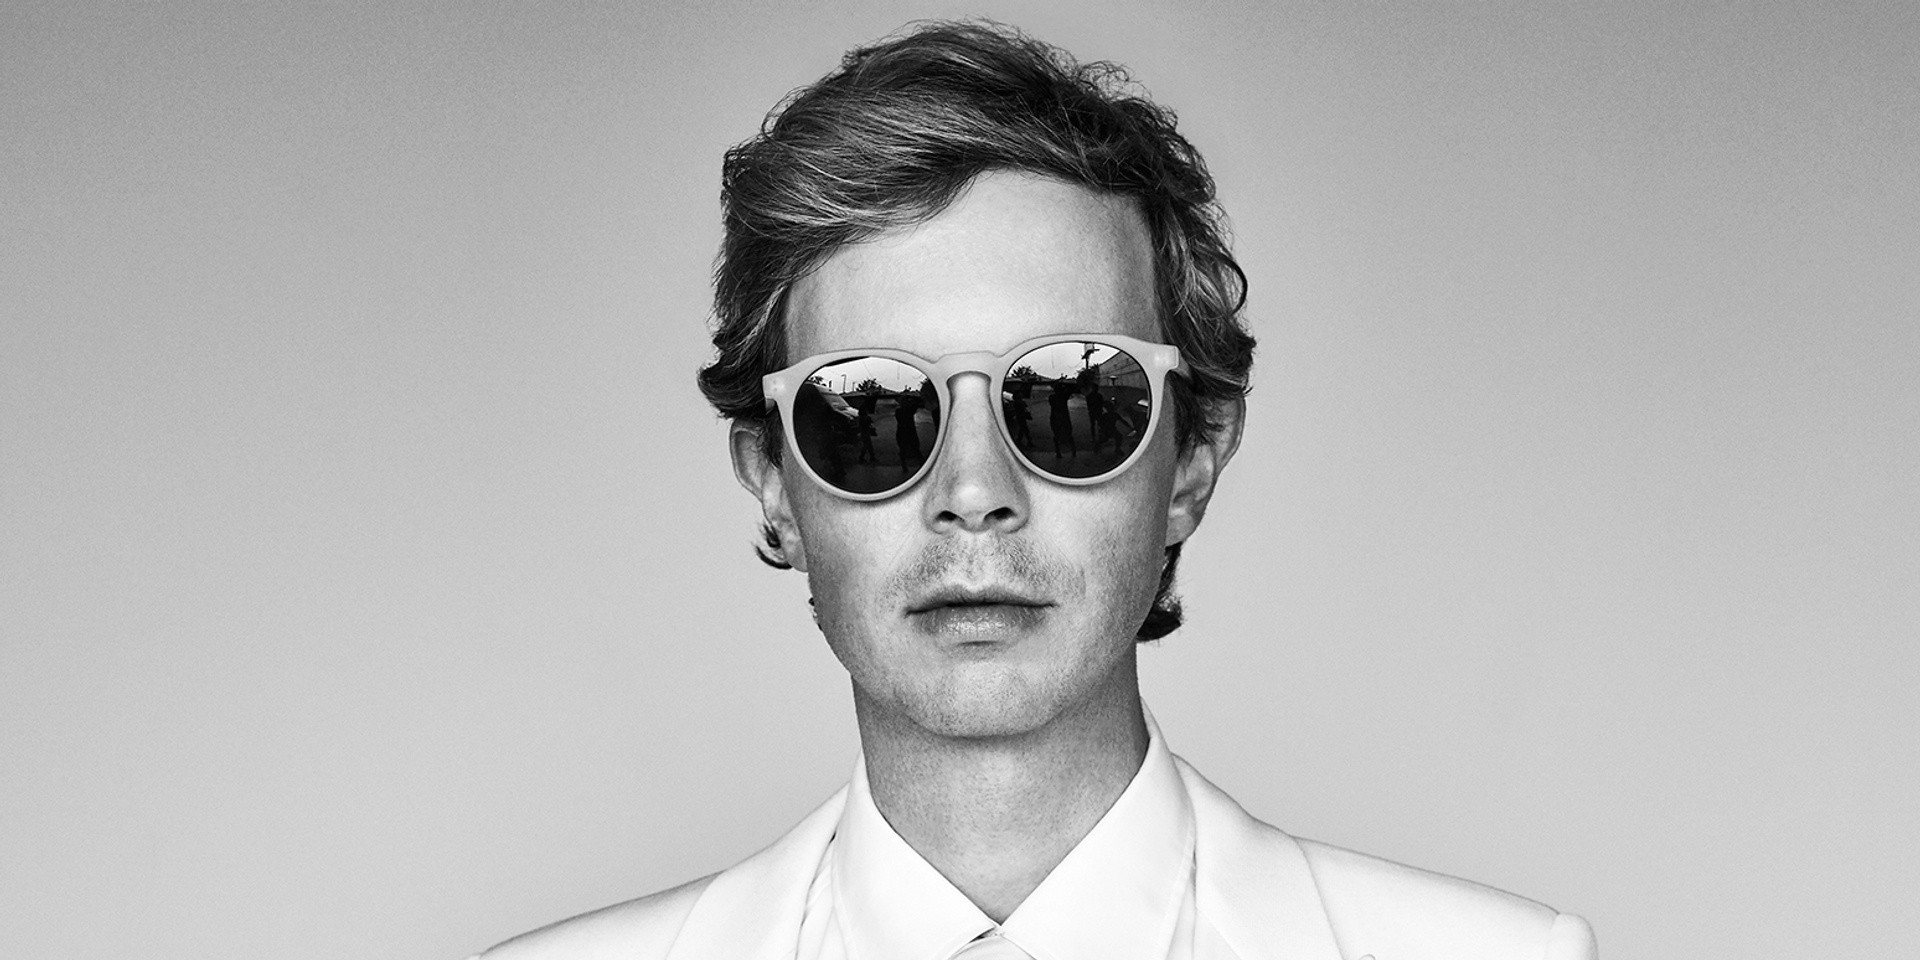 Beck teases upcoming release, Hyperspace, with new artwork 